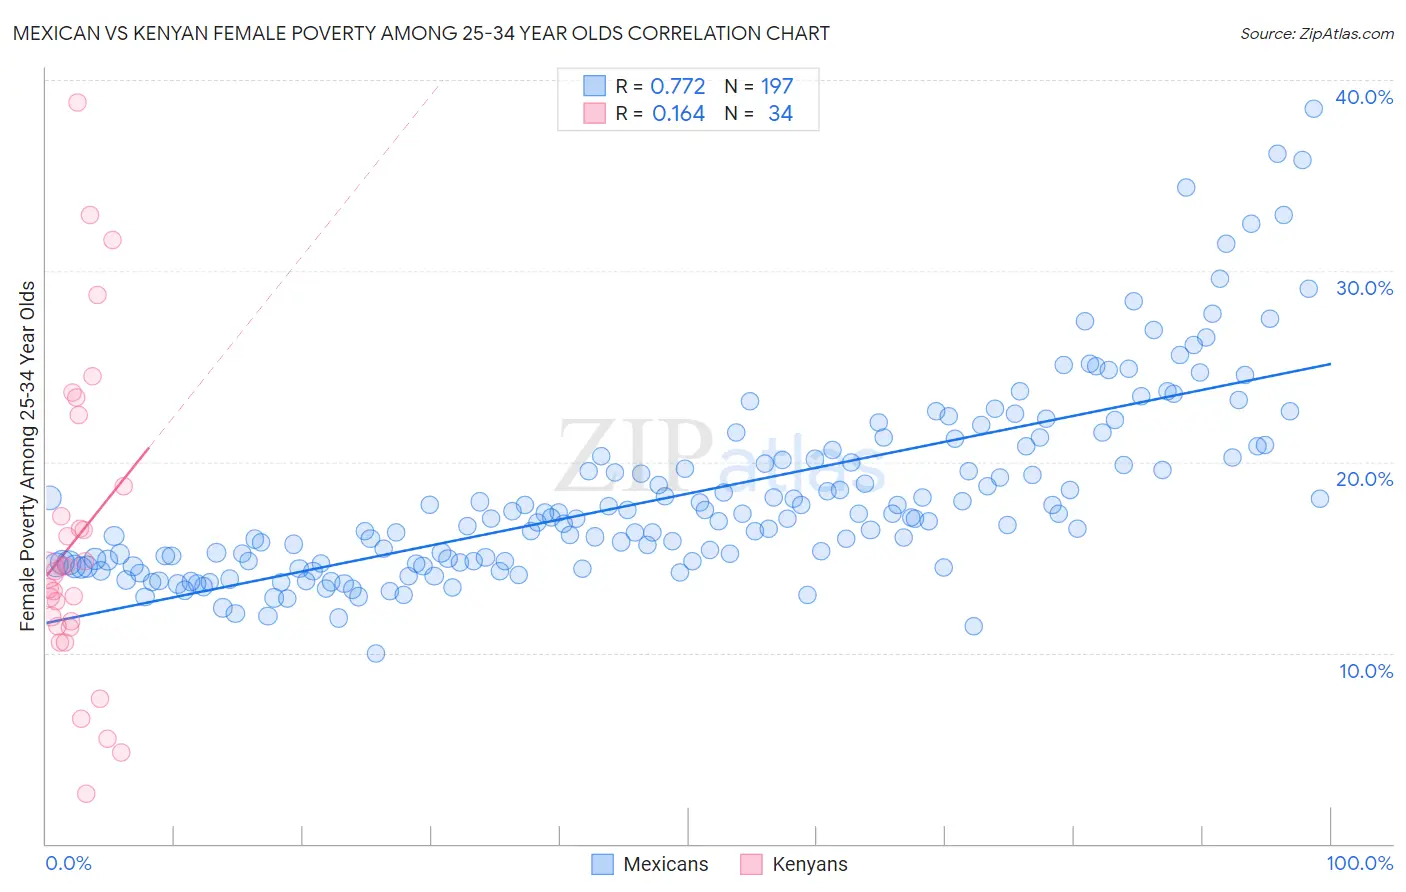 Mexican vs Kenyan Female Poverty Among 25-34 Year Olds